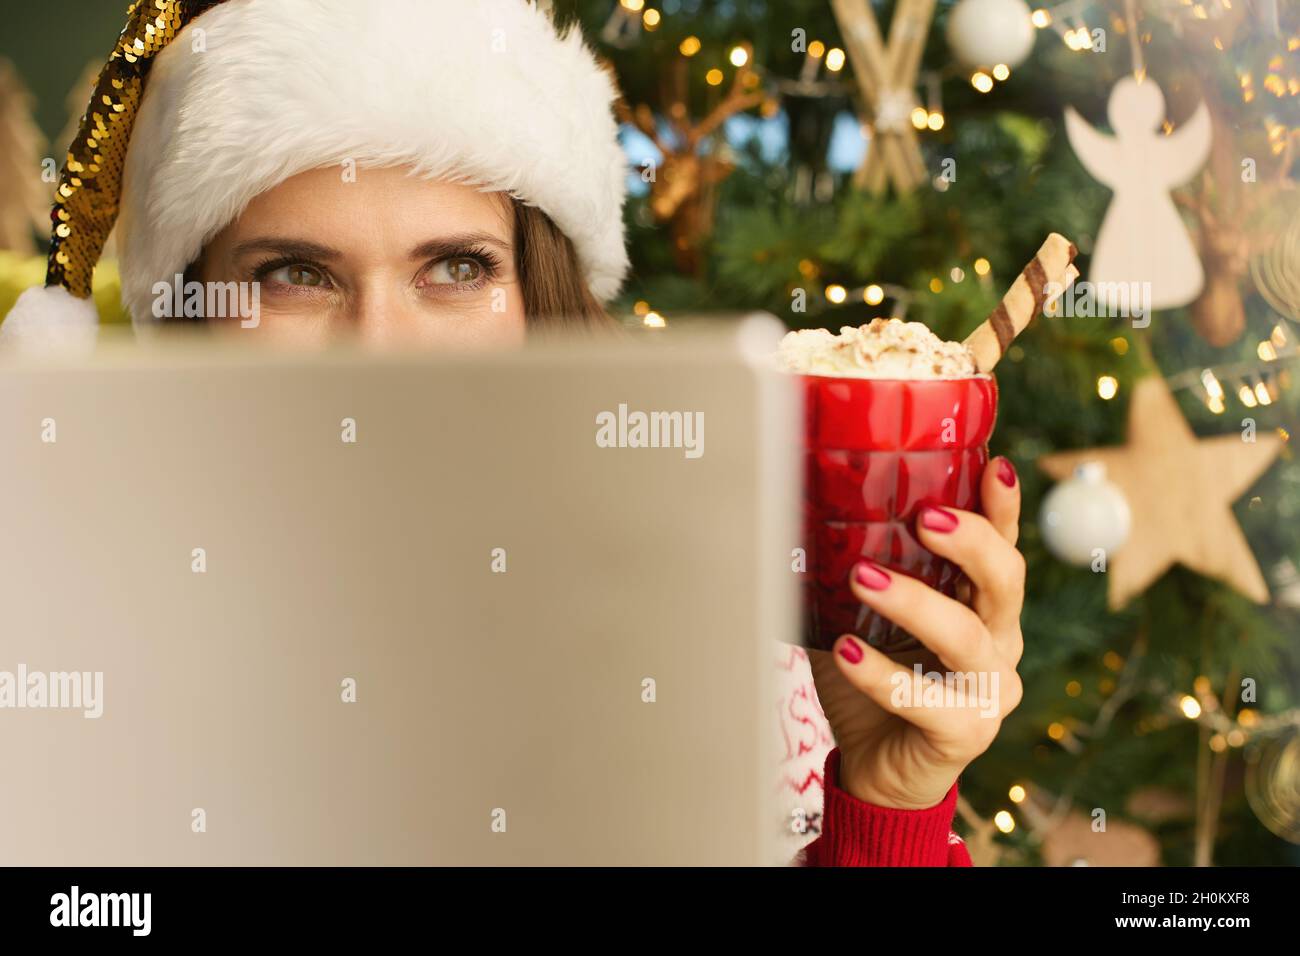 https://c8.alamy.com/comp/2H0KXF8/christmas-time-pensive-modern-middle-aged-housewife-with-santa-hat-and-festive-hot-chocolate-cocktail-making-online-shopping-on-e-commerce-website-on-2H0KXF8.jpg